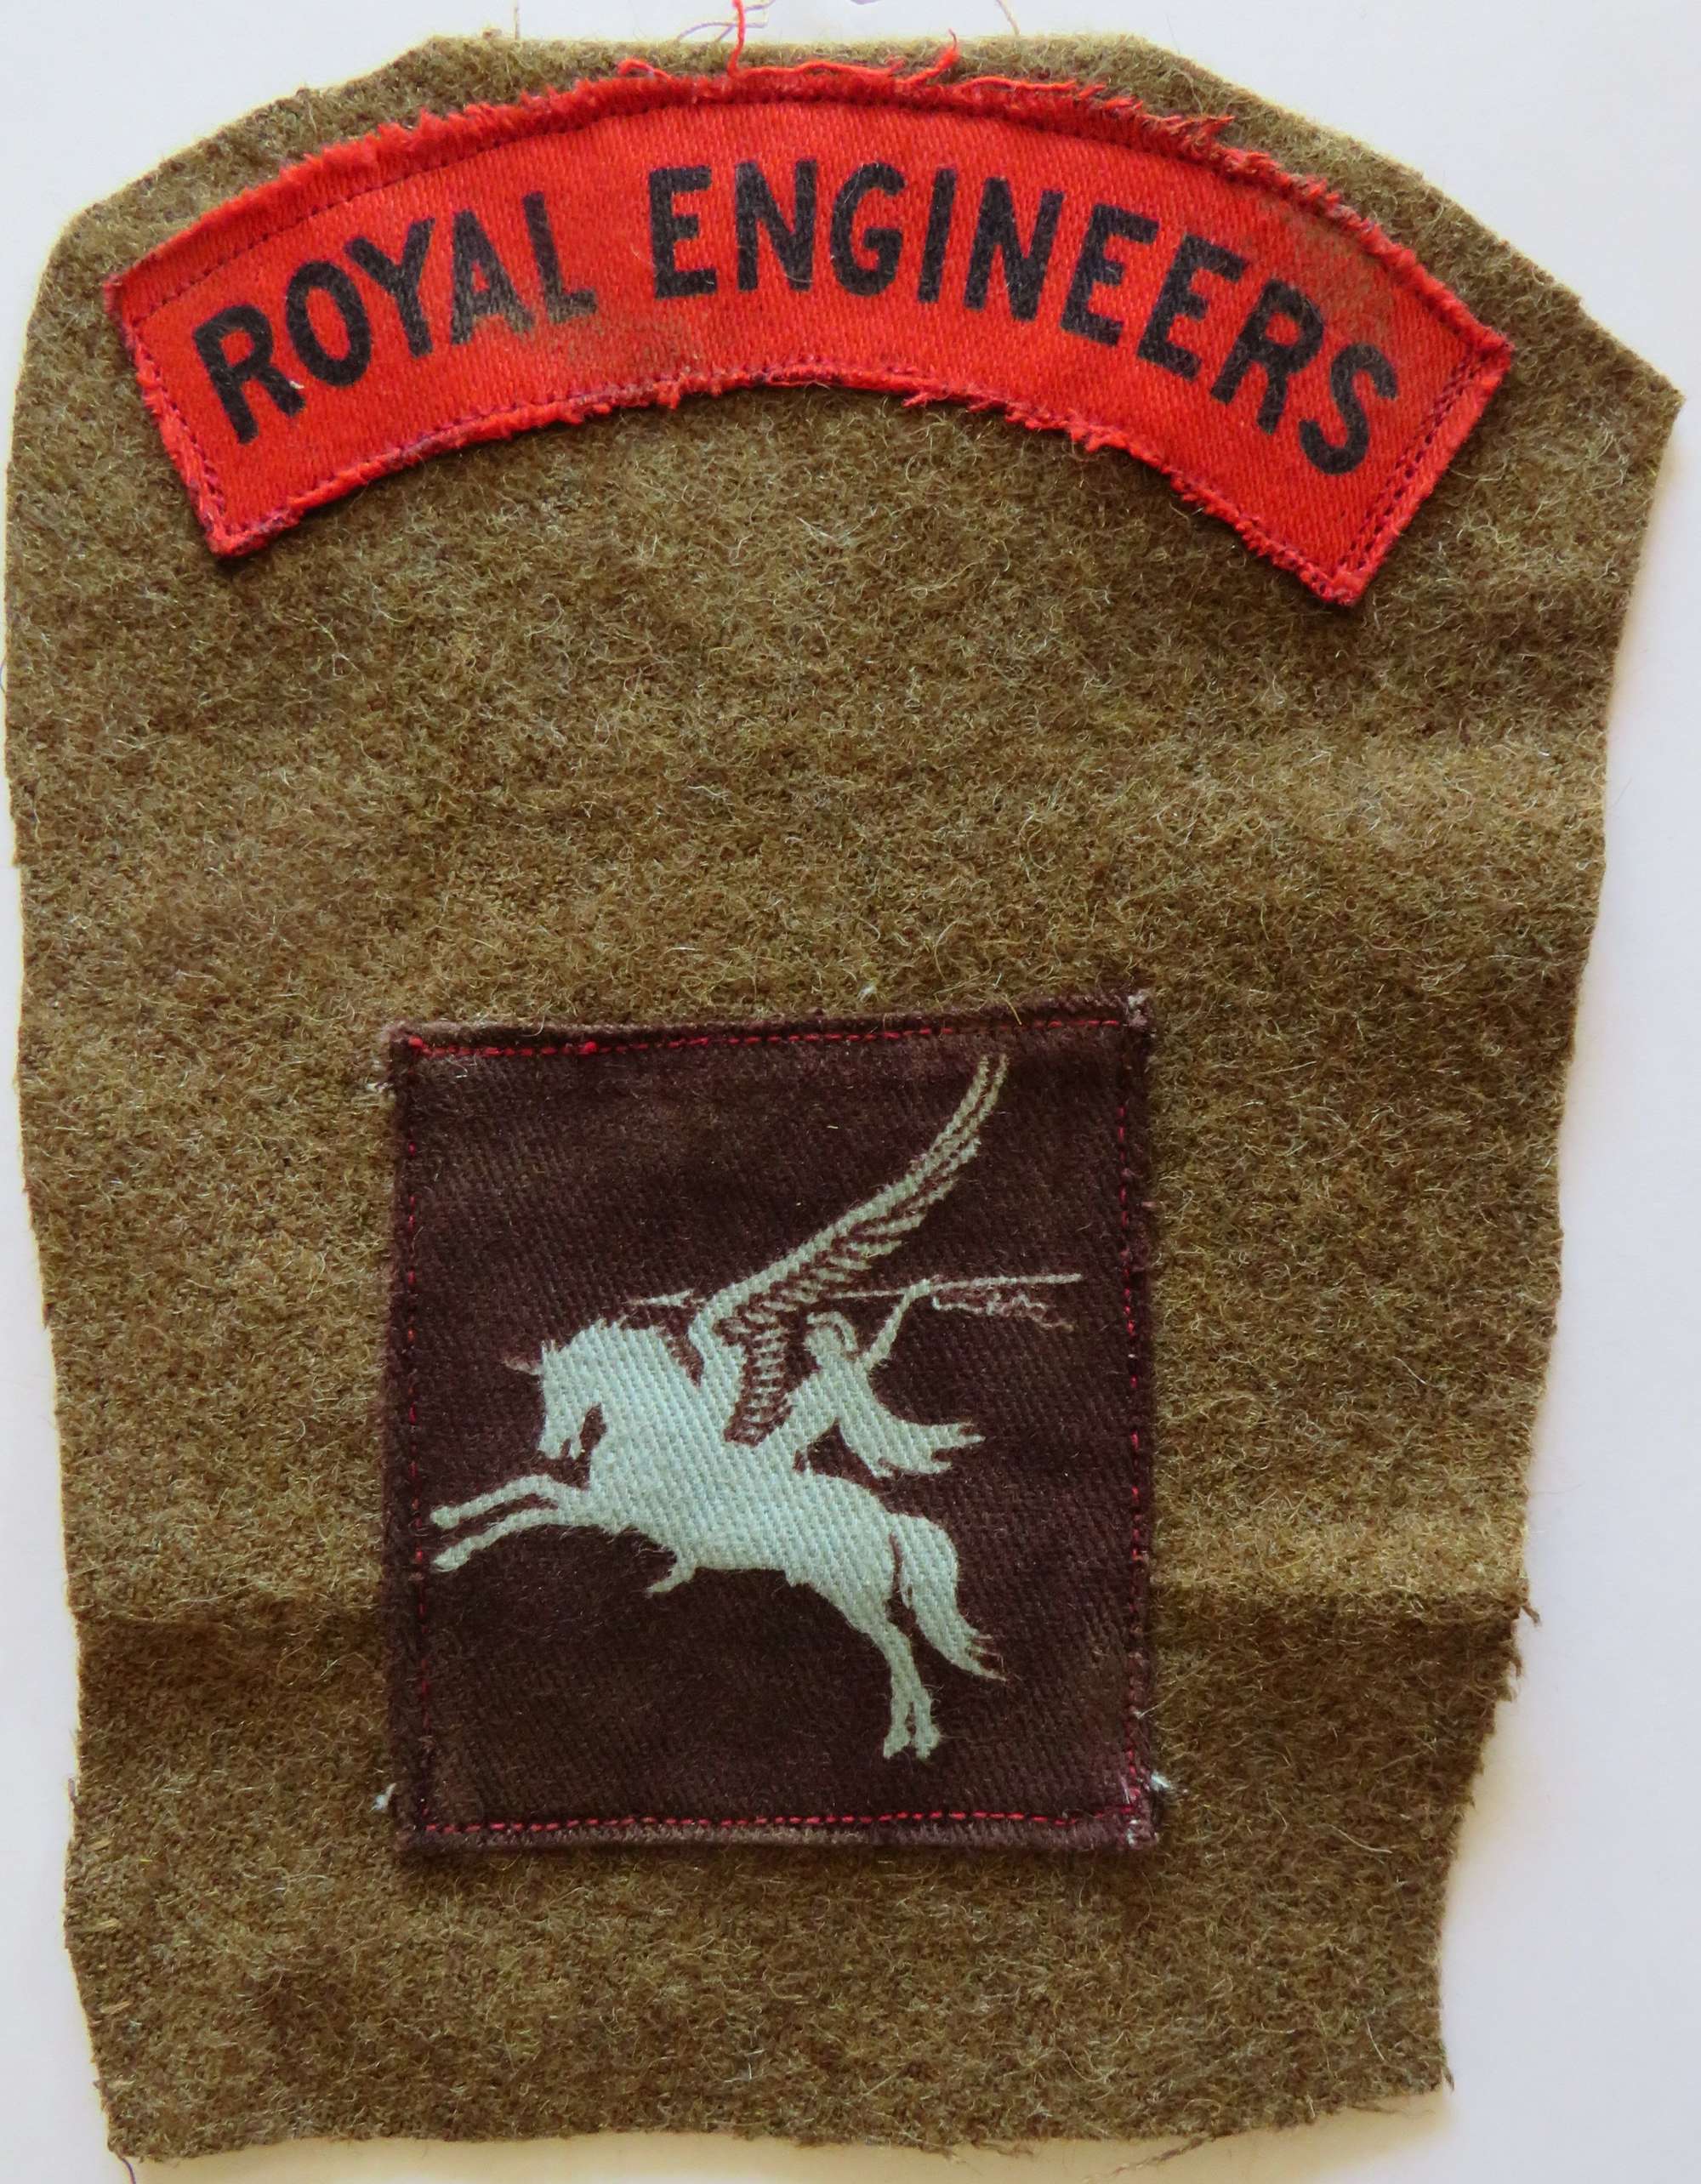 Royal Engineers Airborne Arm Section